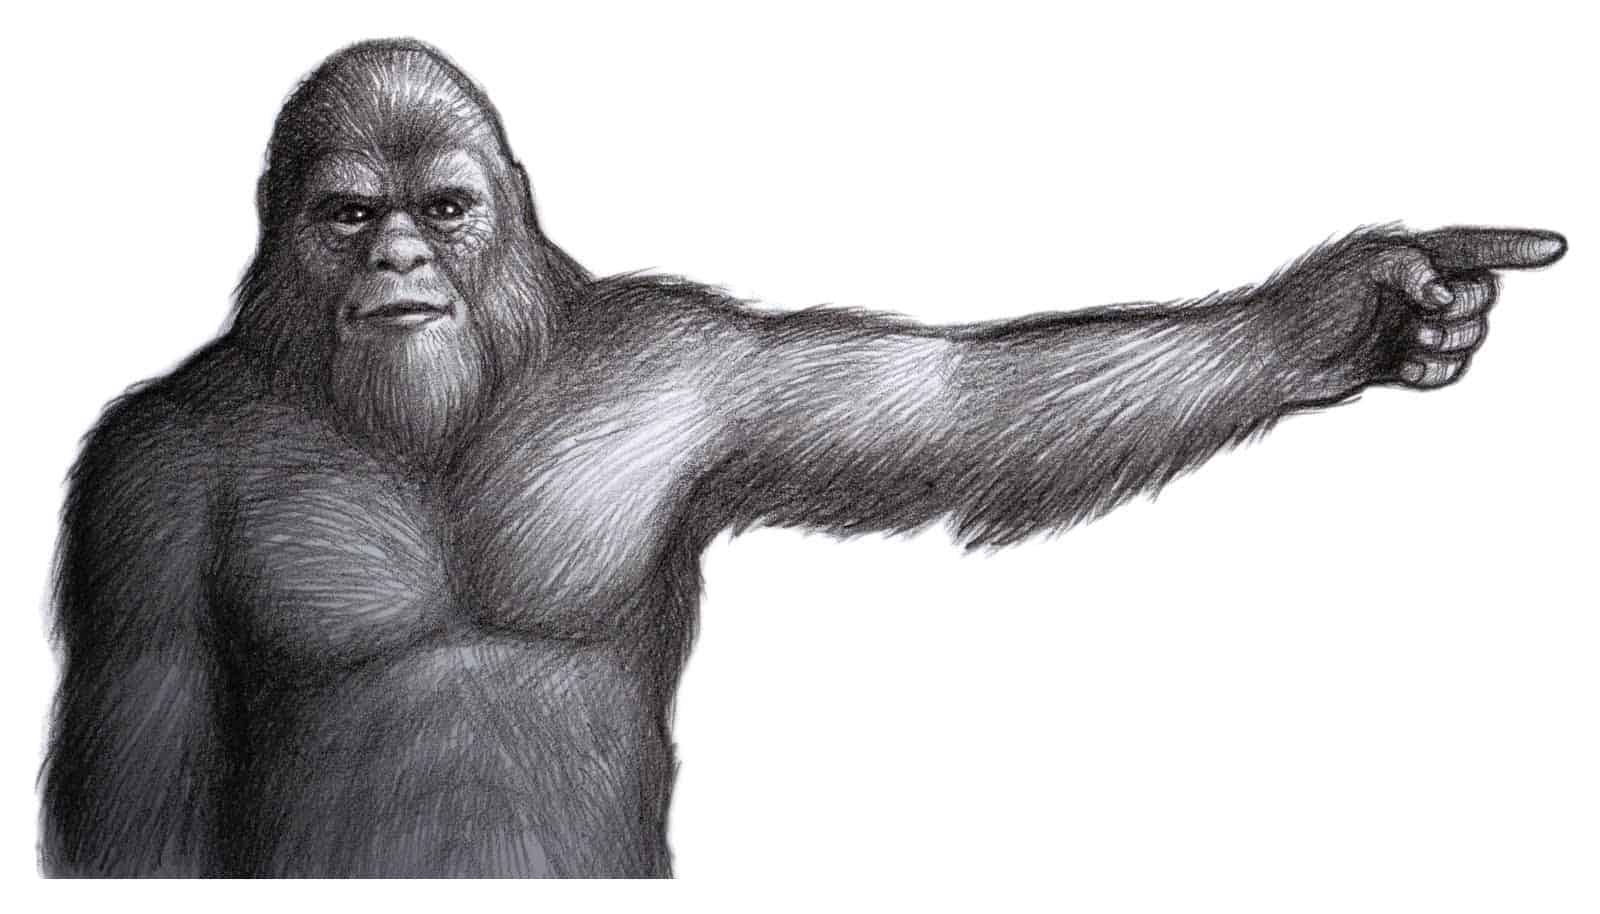 Bigfoot illustration by Rick Spears